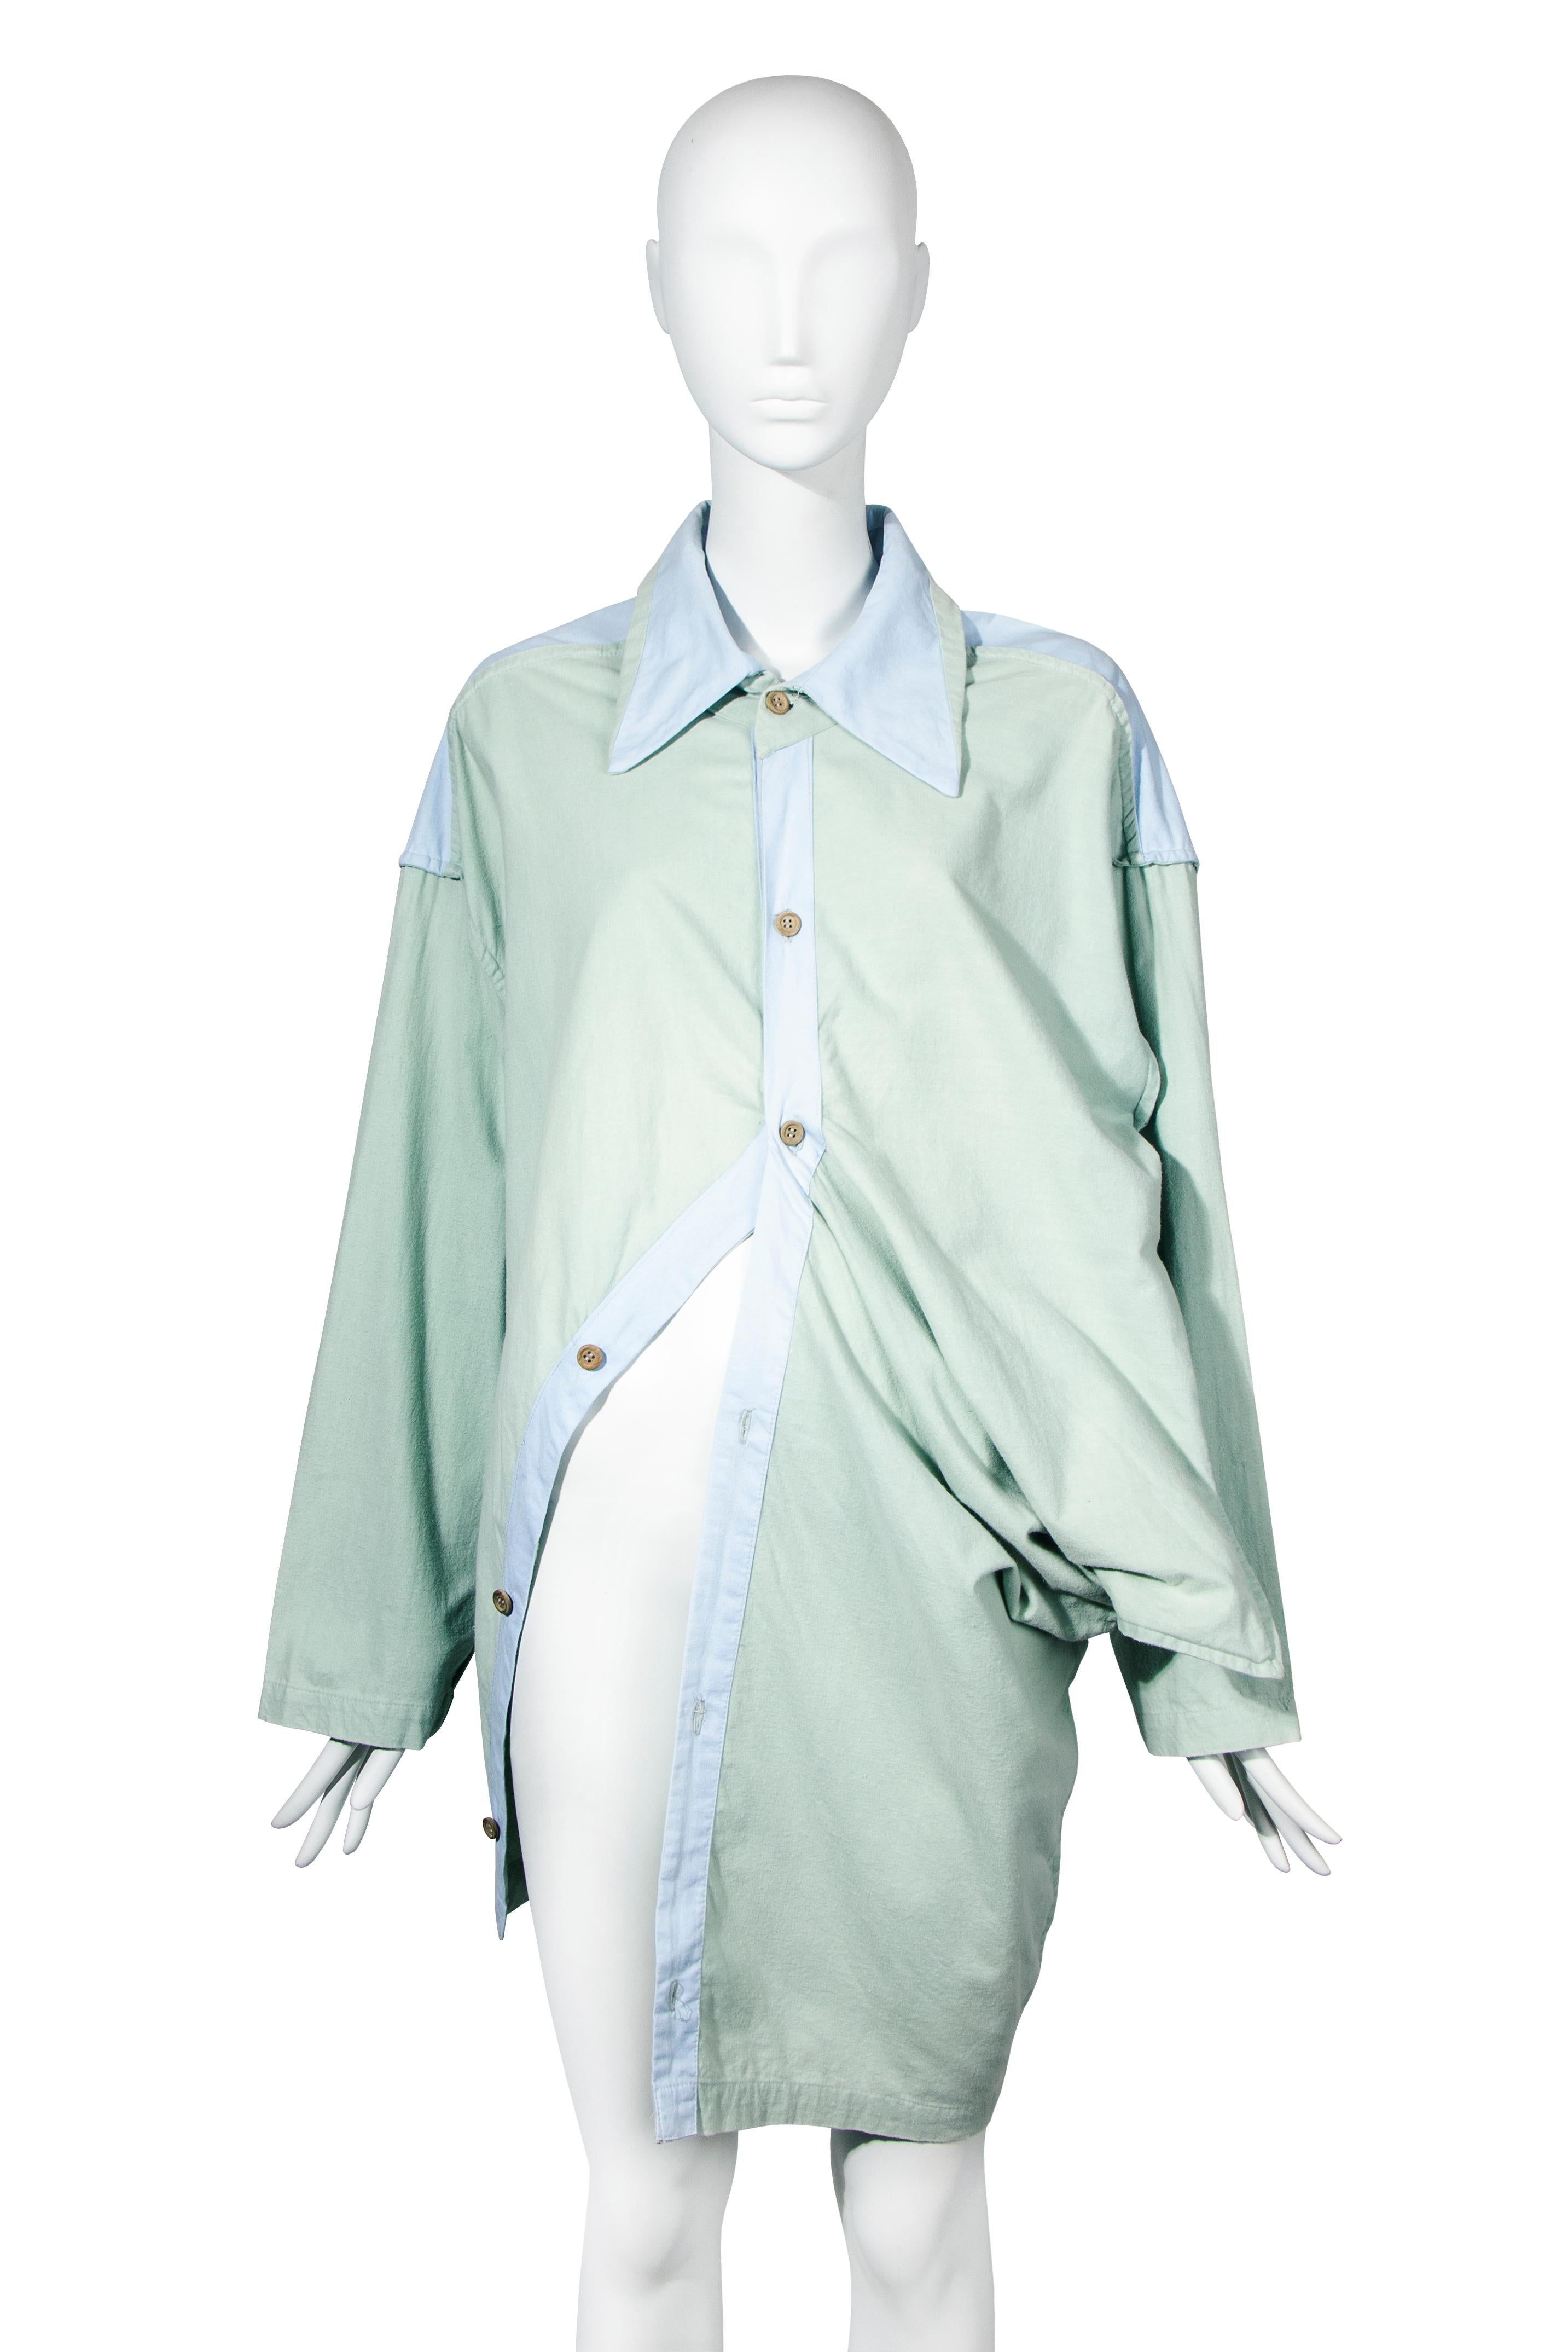 John Galliano 'The Ludic Games' spencer jacket & oversized shirt pair, fw 1985 For Sale 8